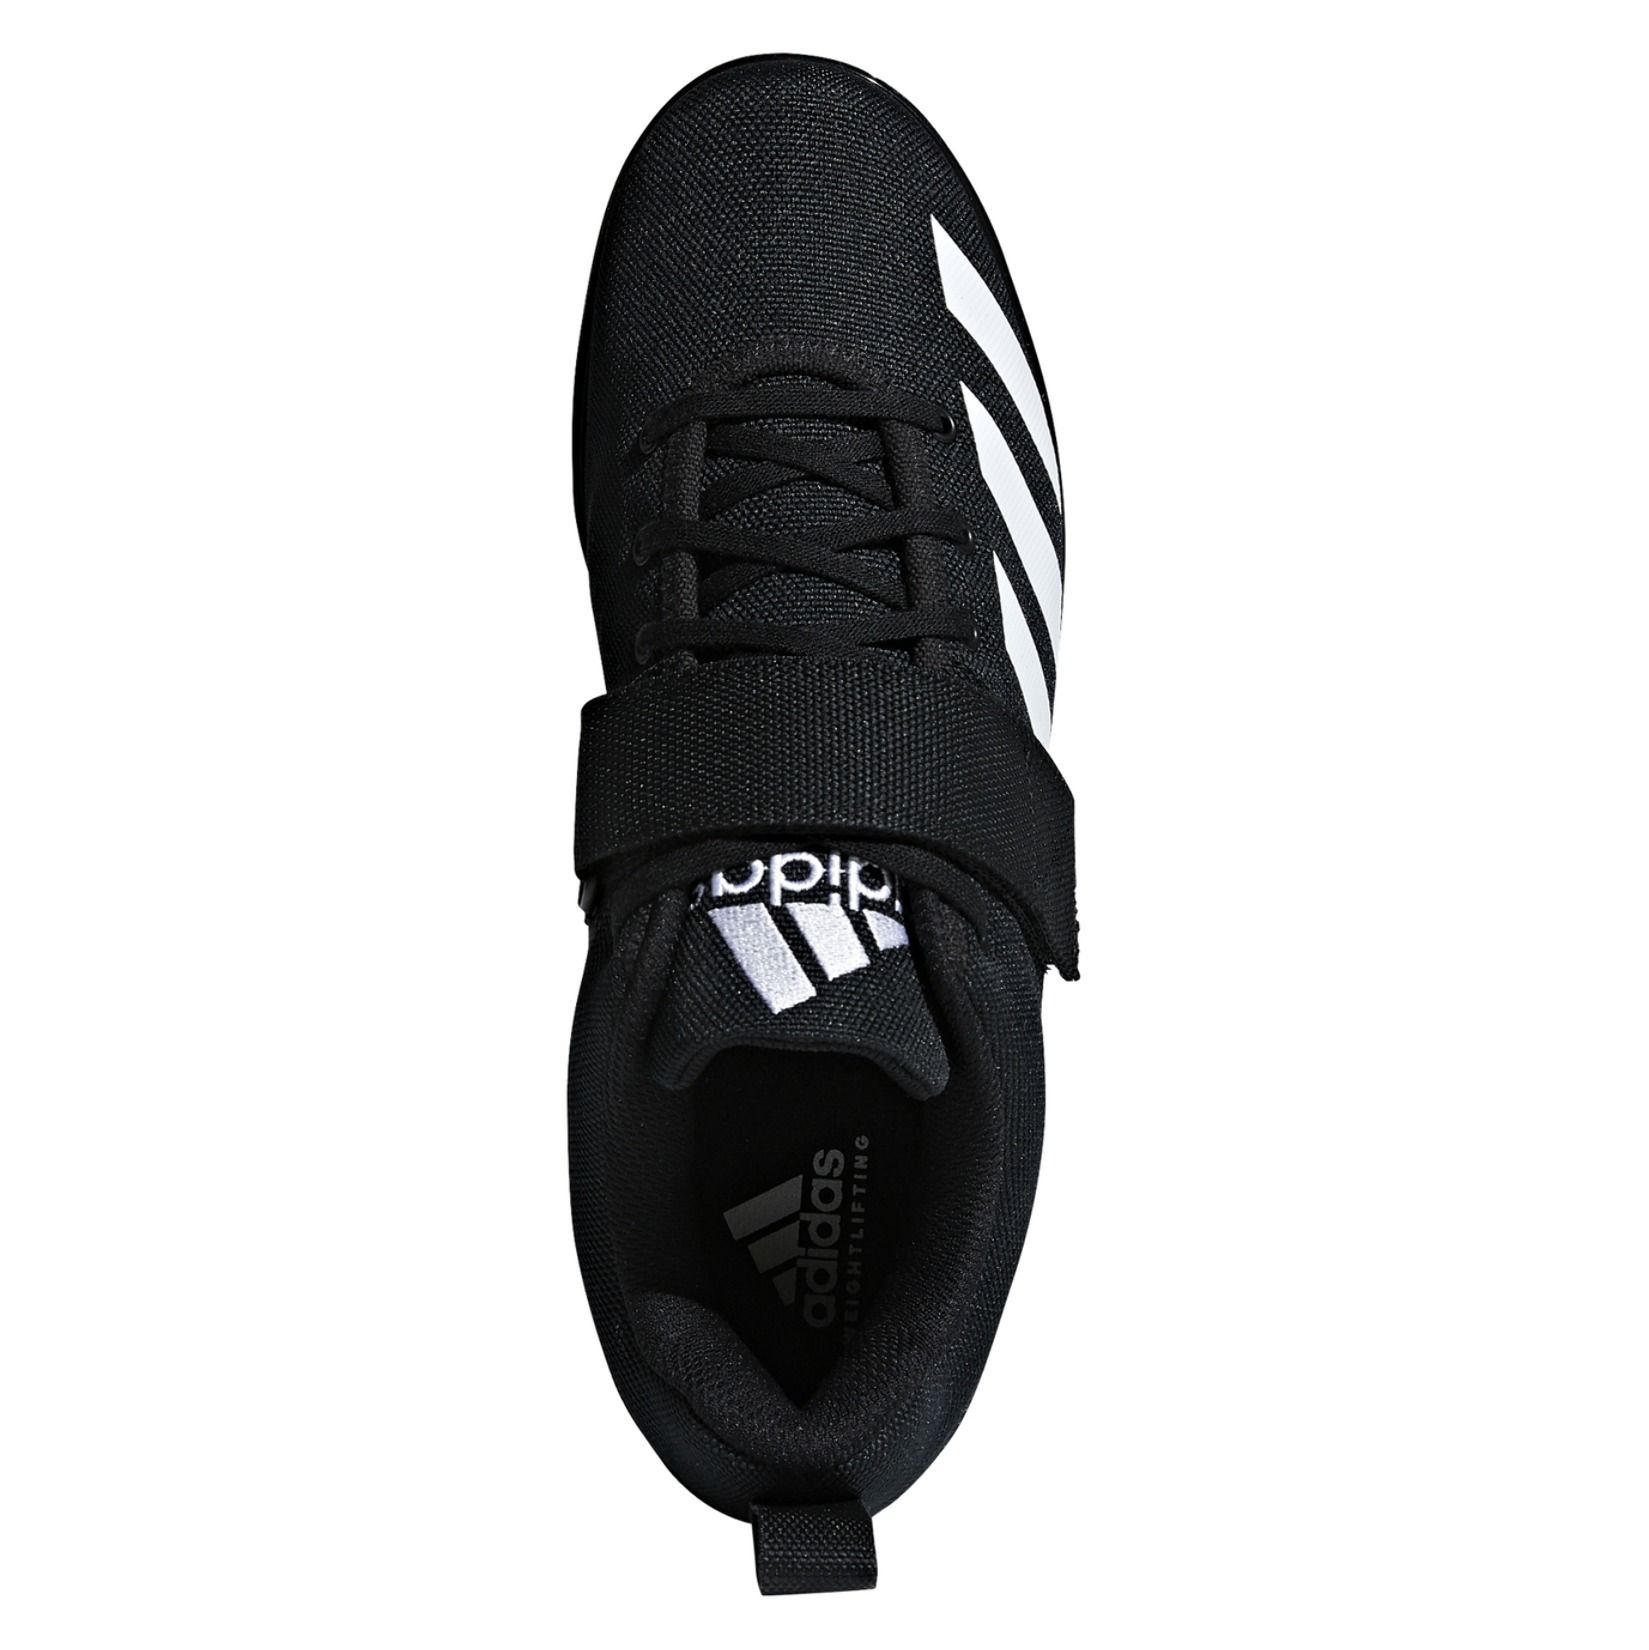 Adidas Powerlift Black Friday Top Sellers, SAVE 54% - aveclumiere.com